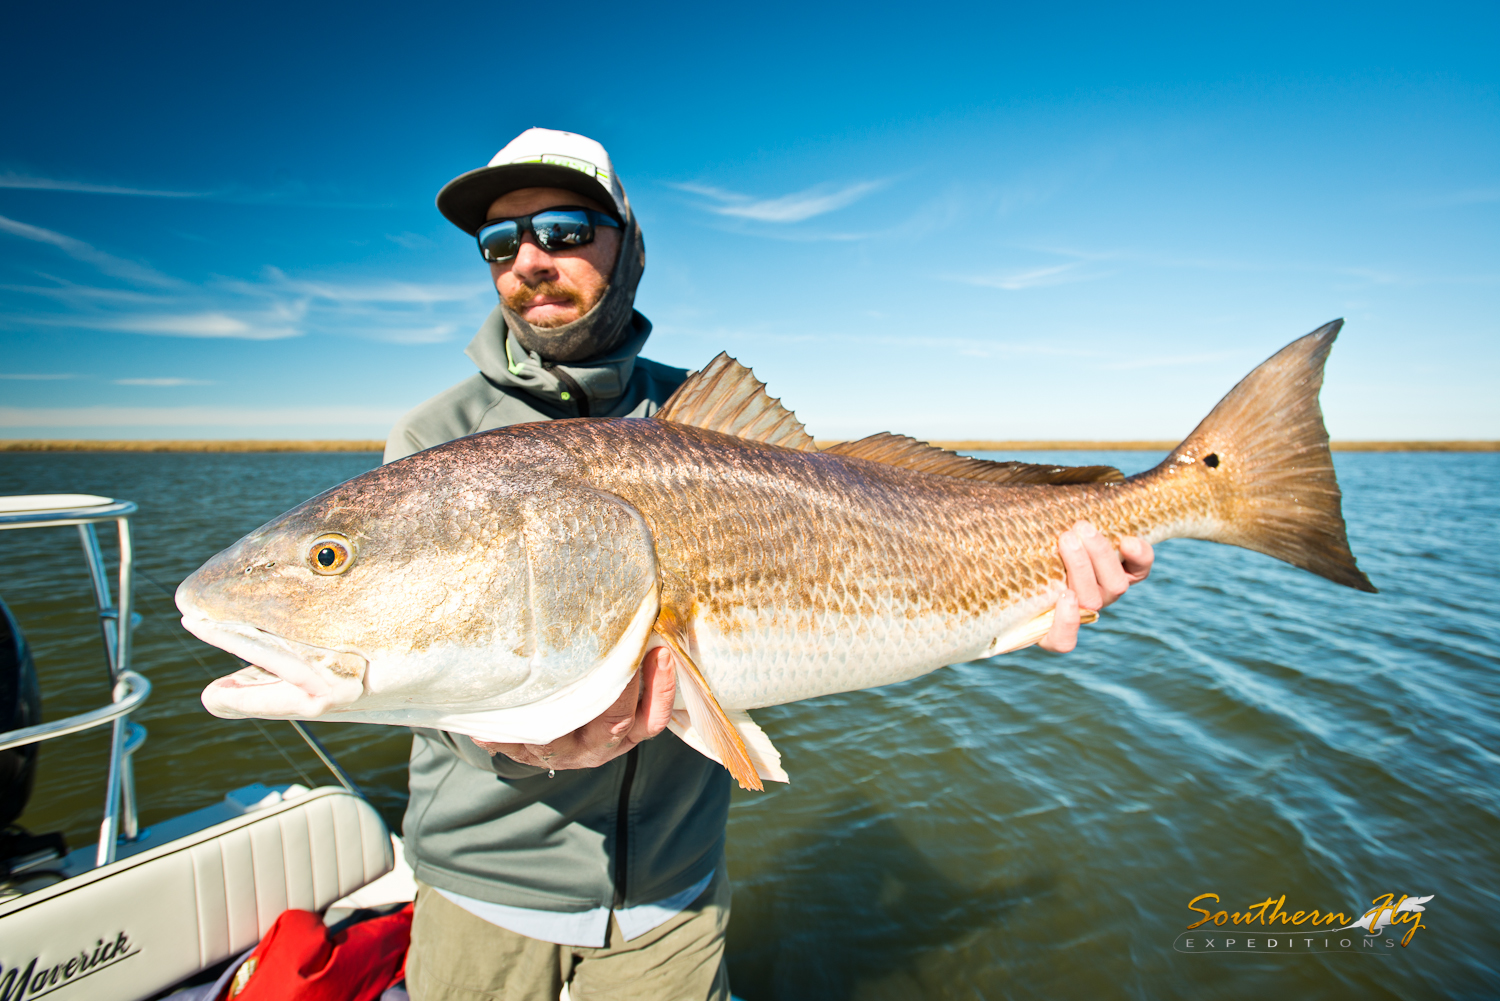 Southern Fly Expeditions fly fishing new orleans with Captain Brandon Keck